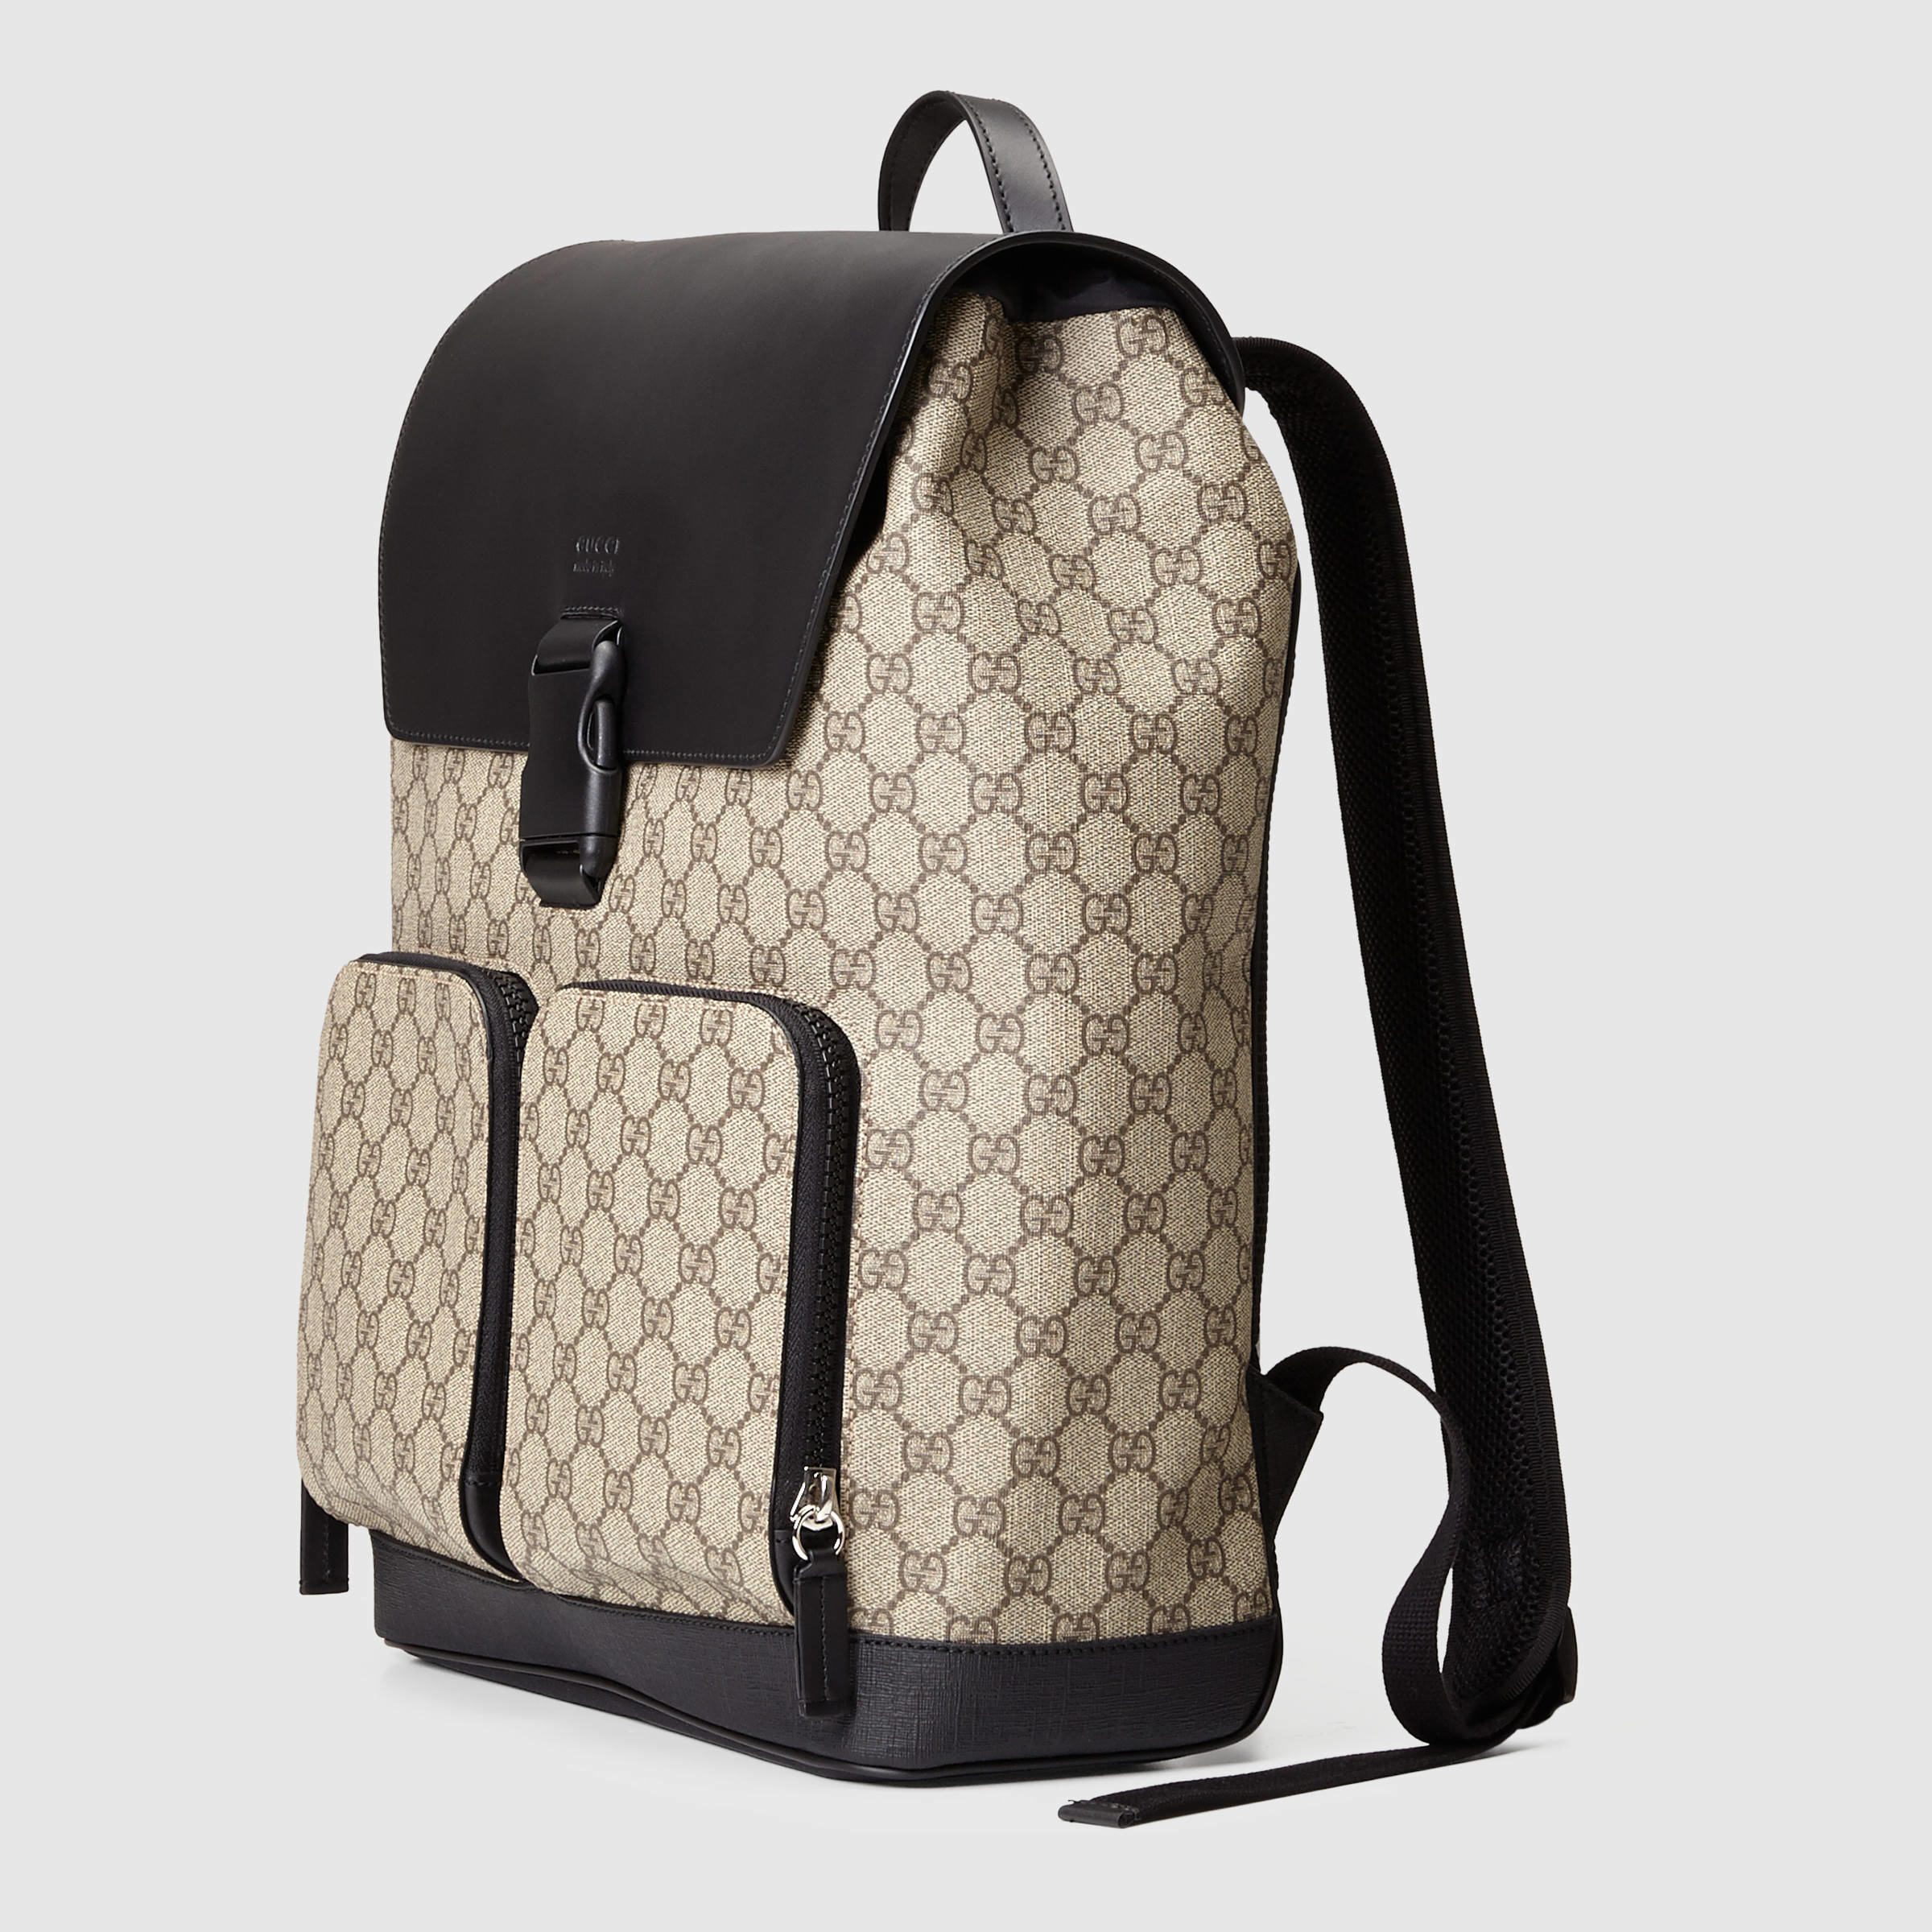 Gucci Gg Supreme Backpack - Lyst